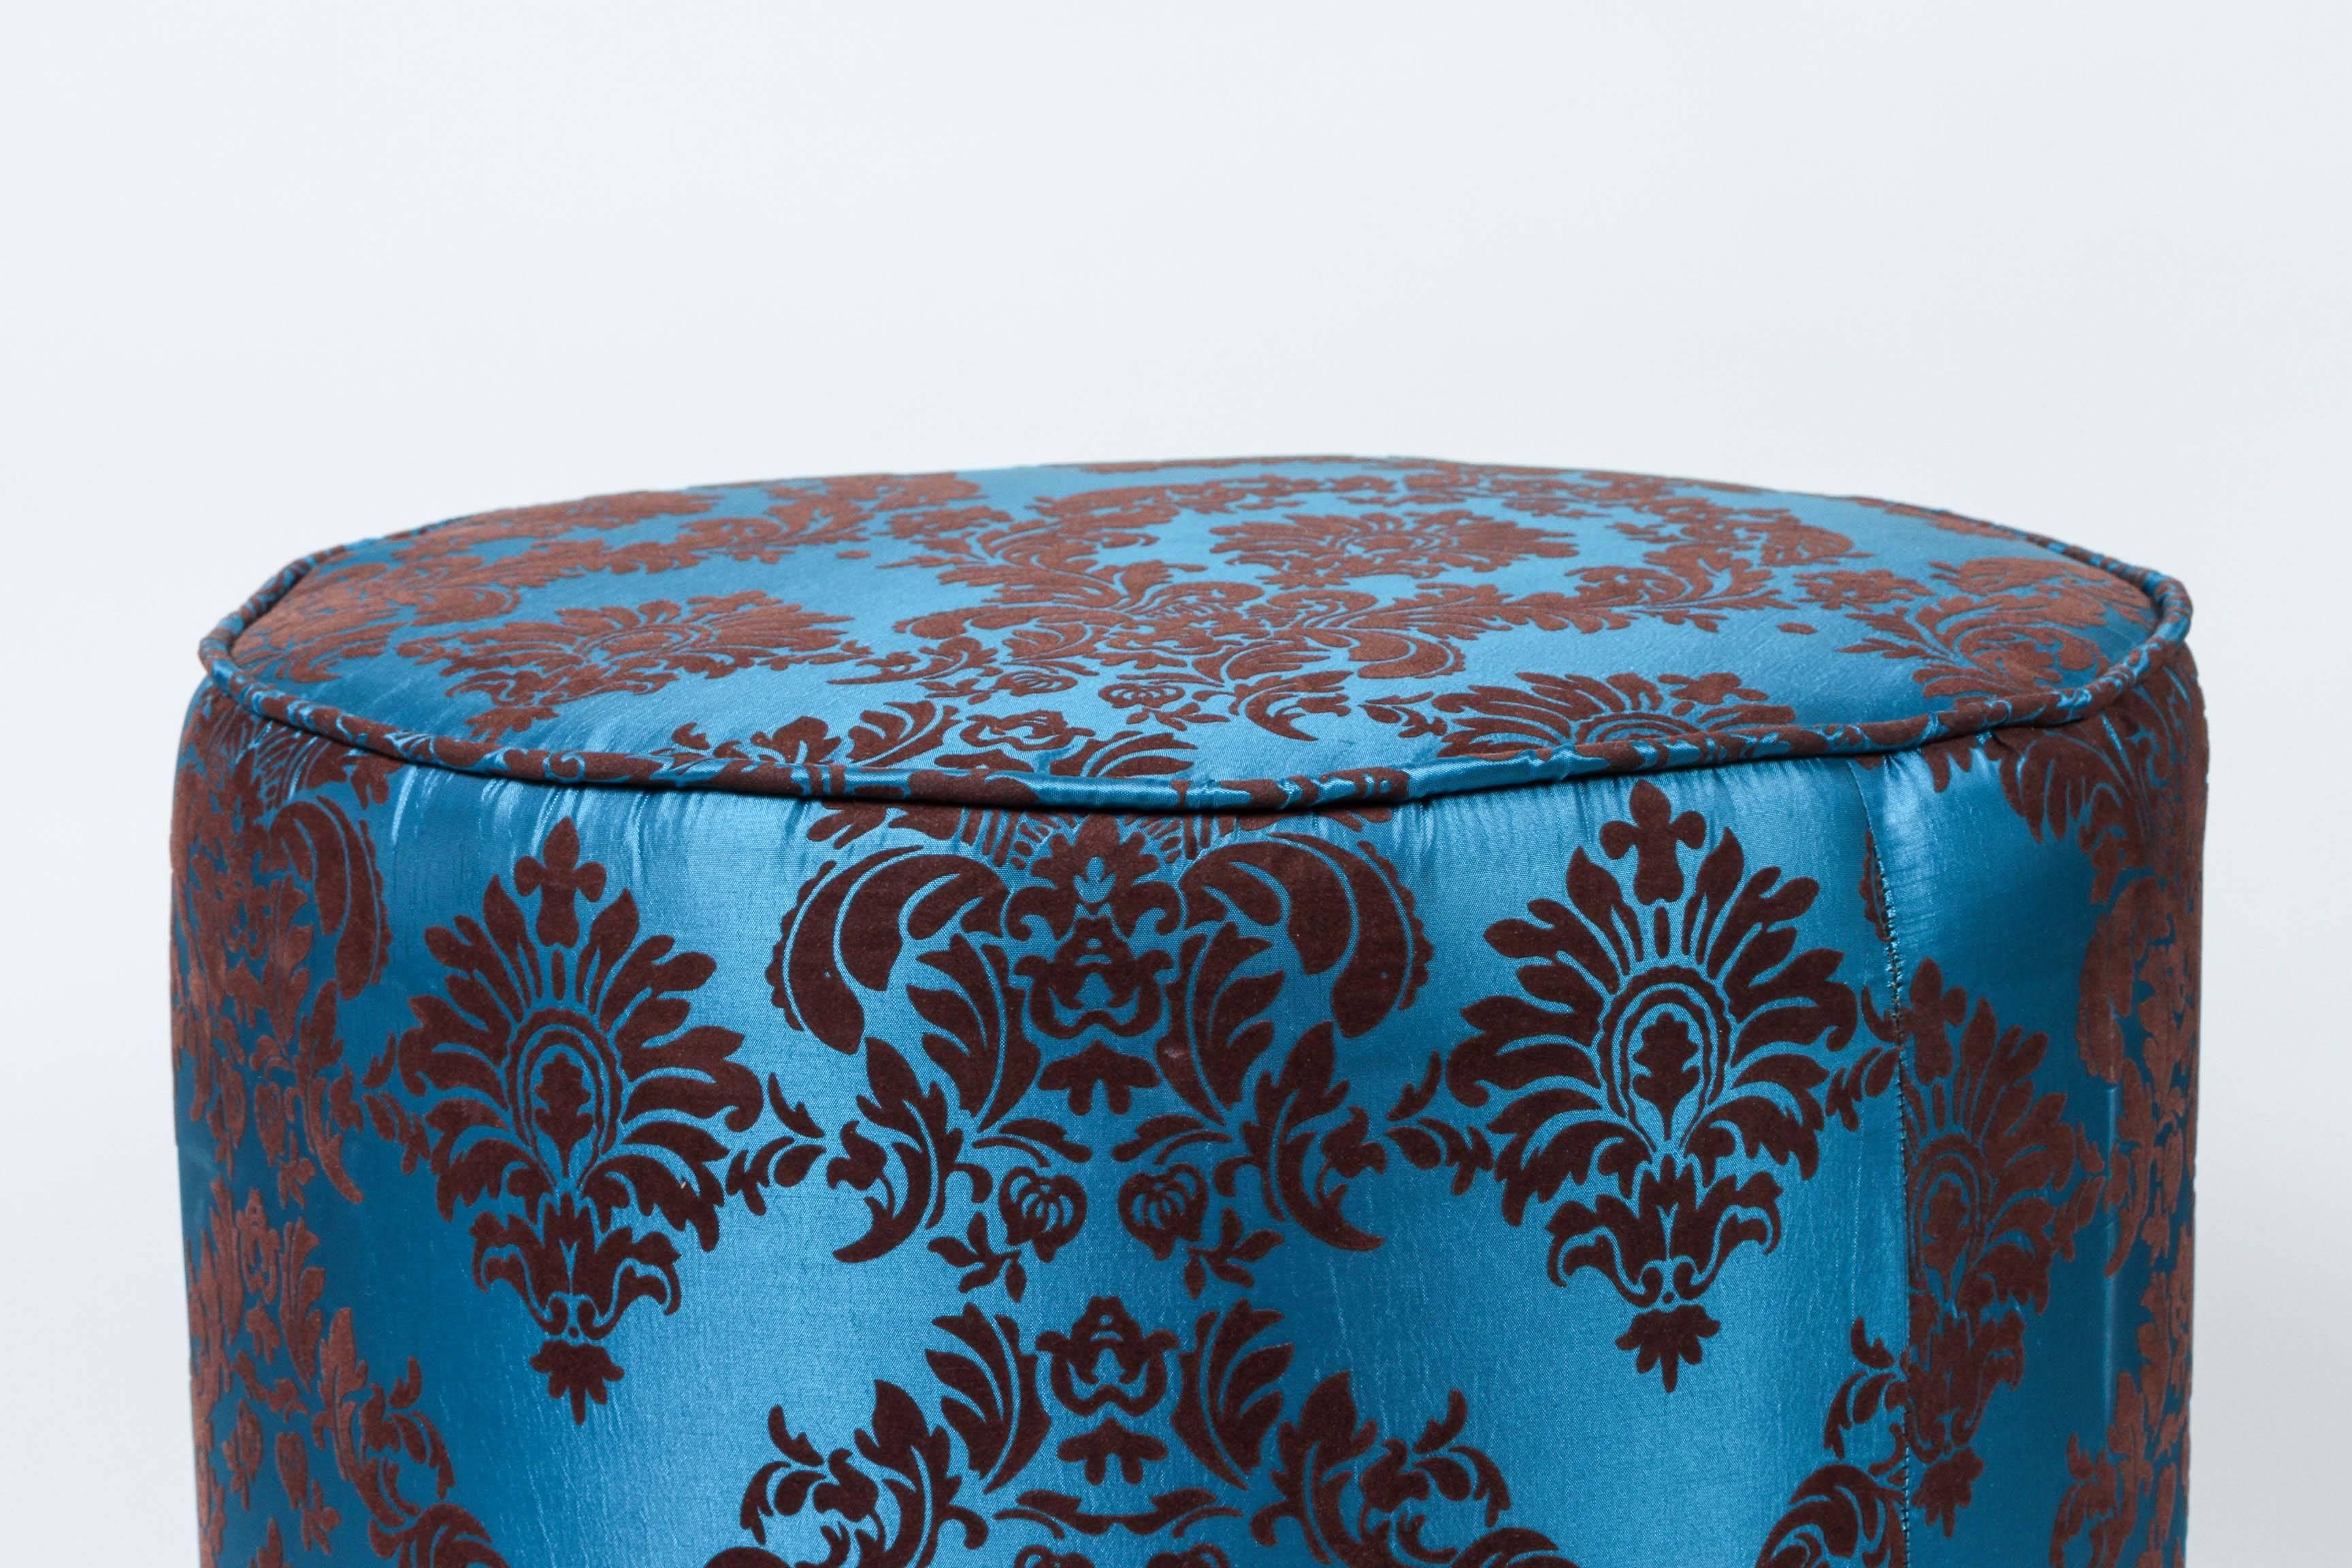 Vintage round Moroccan pouf in blue and brown cut velvet upholstery in Art Deco style.
Moroccan little pouf hassock, upholstered footstool or modern circular ottoman, vanity seat.
This versatile accent piece, pouf is designed primarily for seating